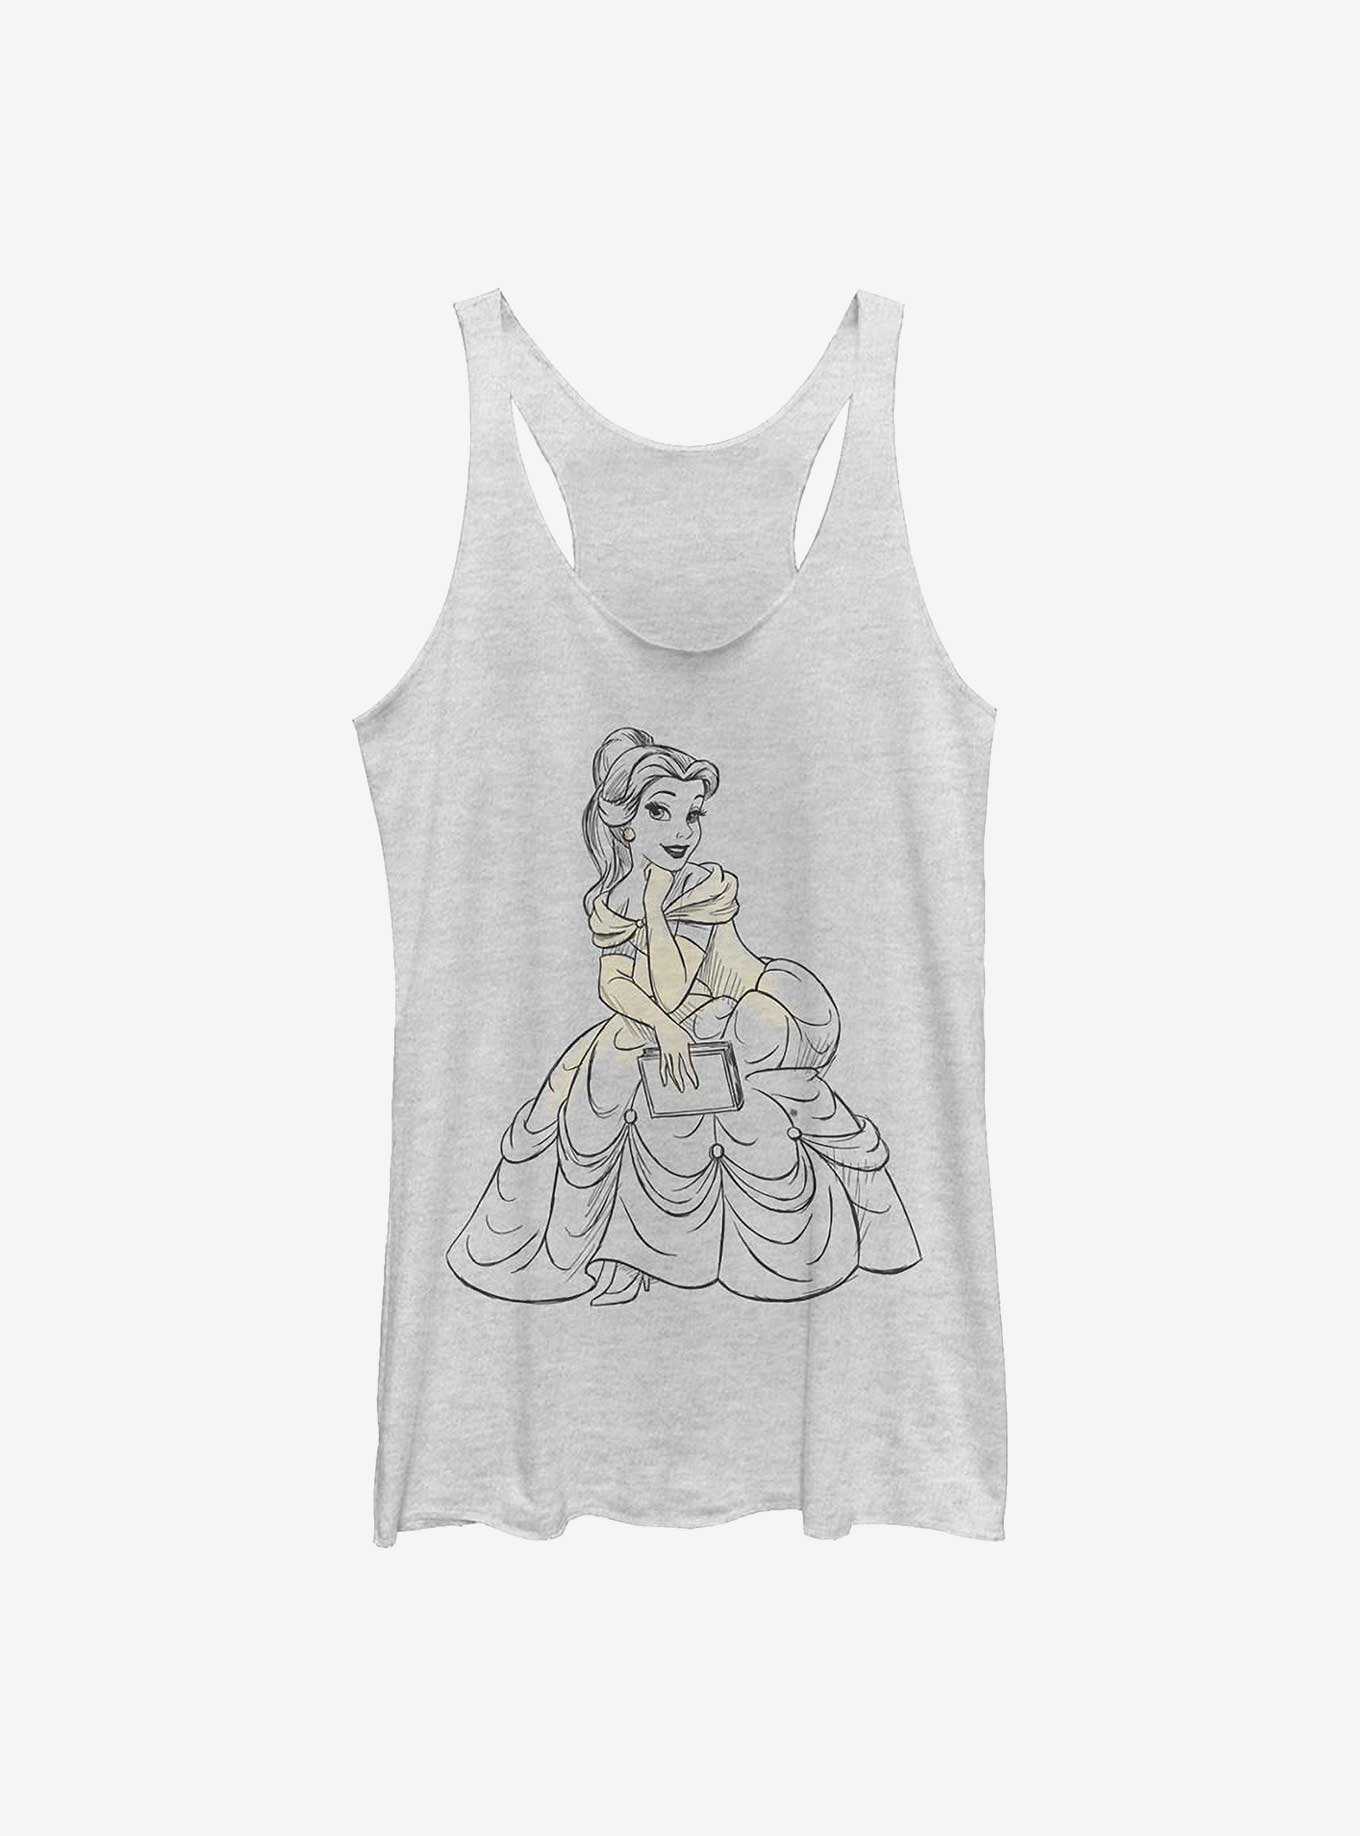 Disney Beauty and The Beast Belle Sketch Silhouette  Womens Tank Top, , hi-res